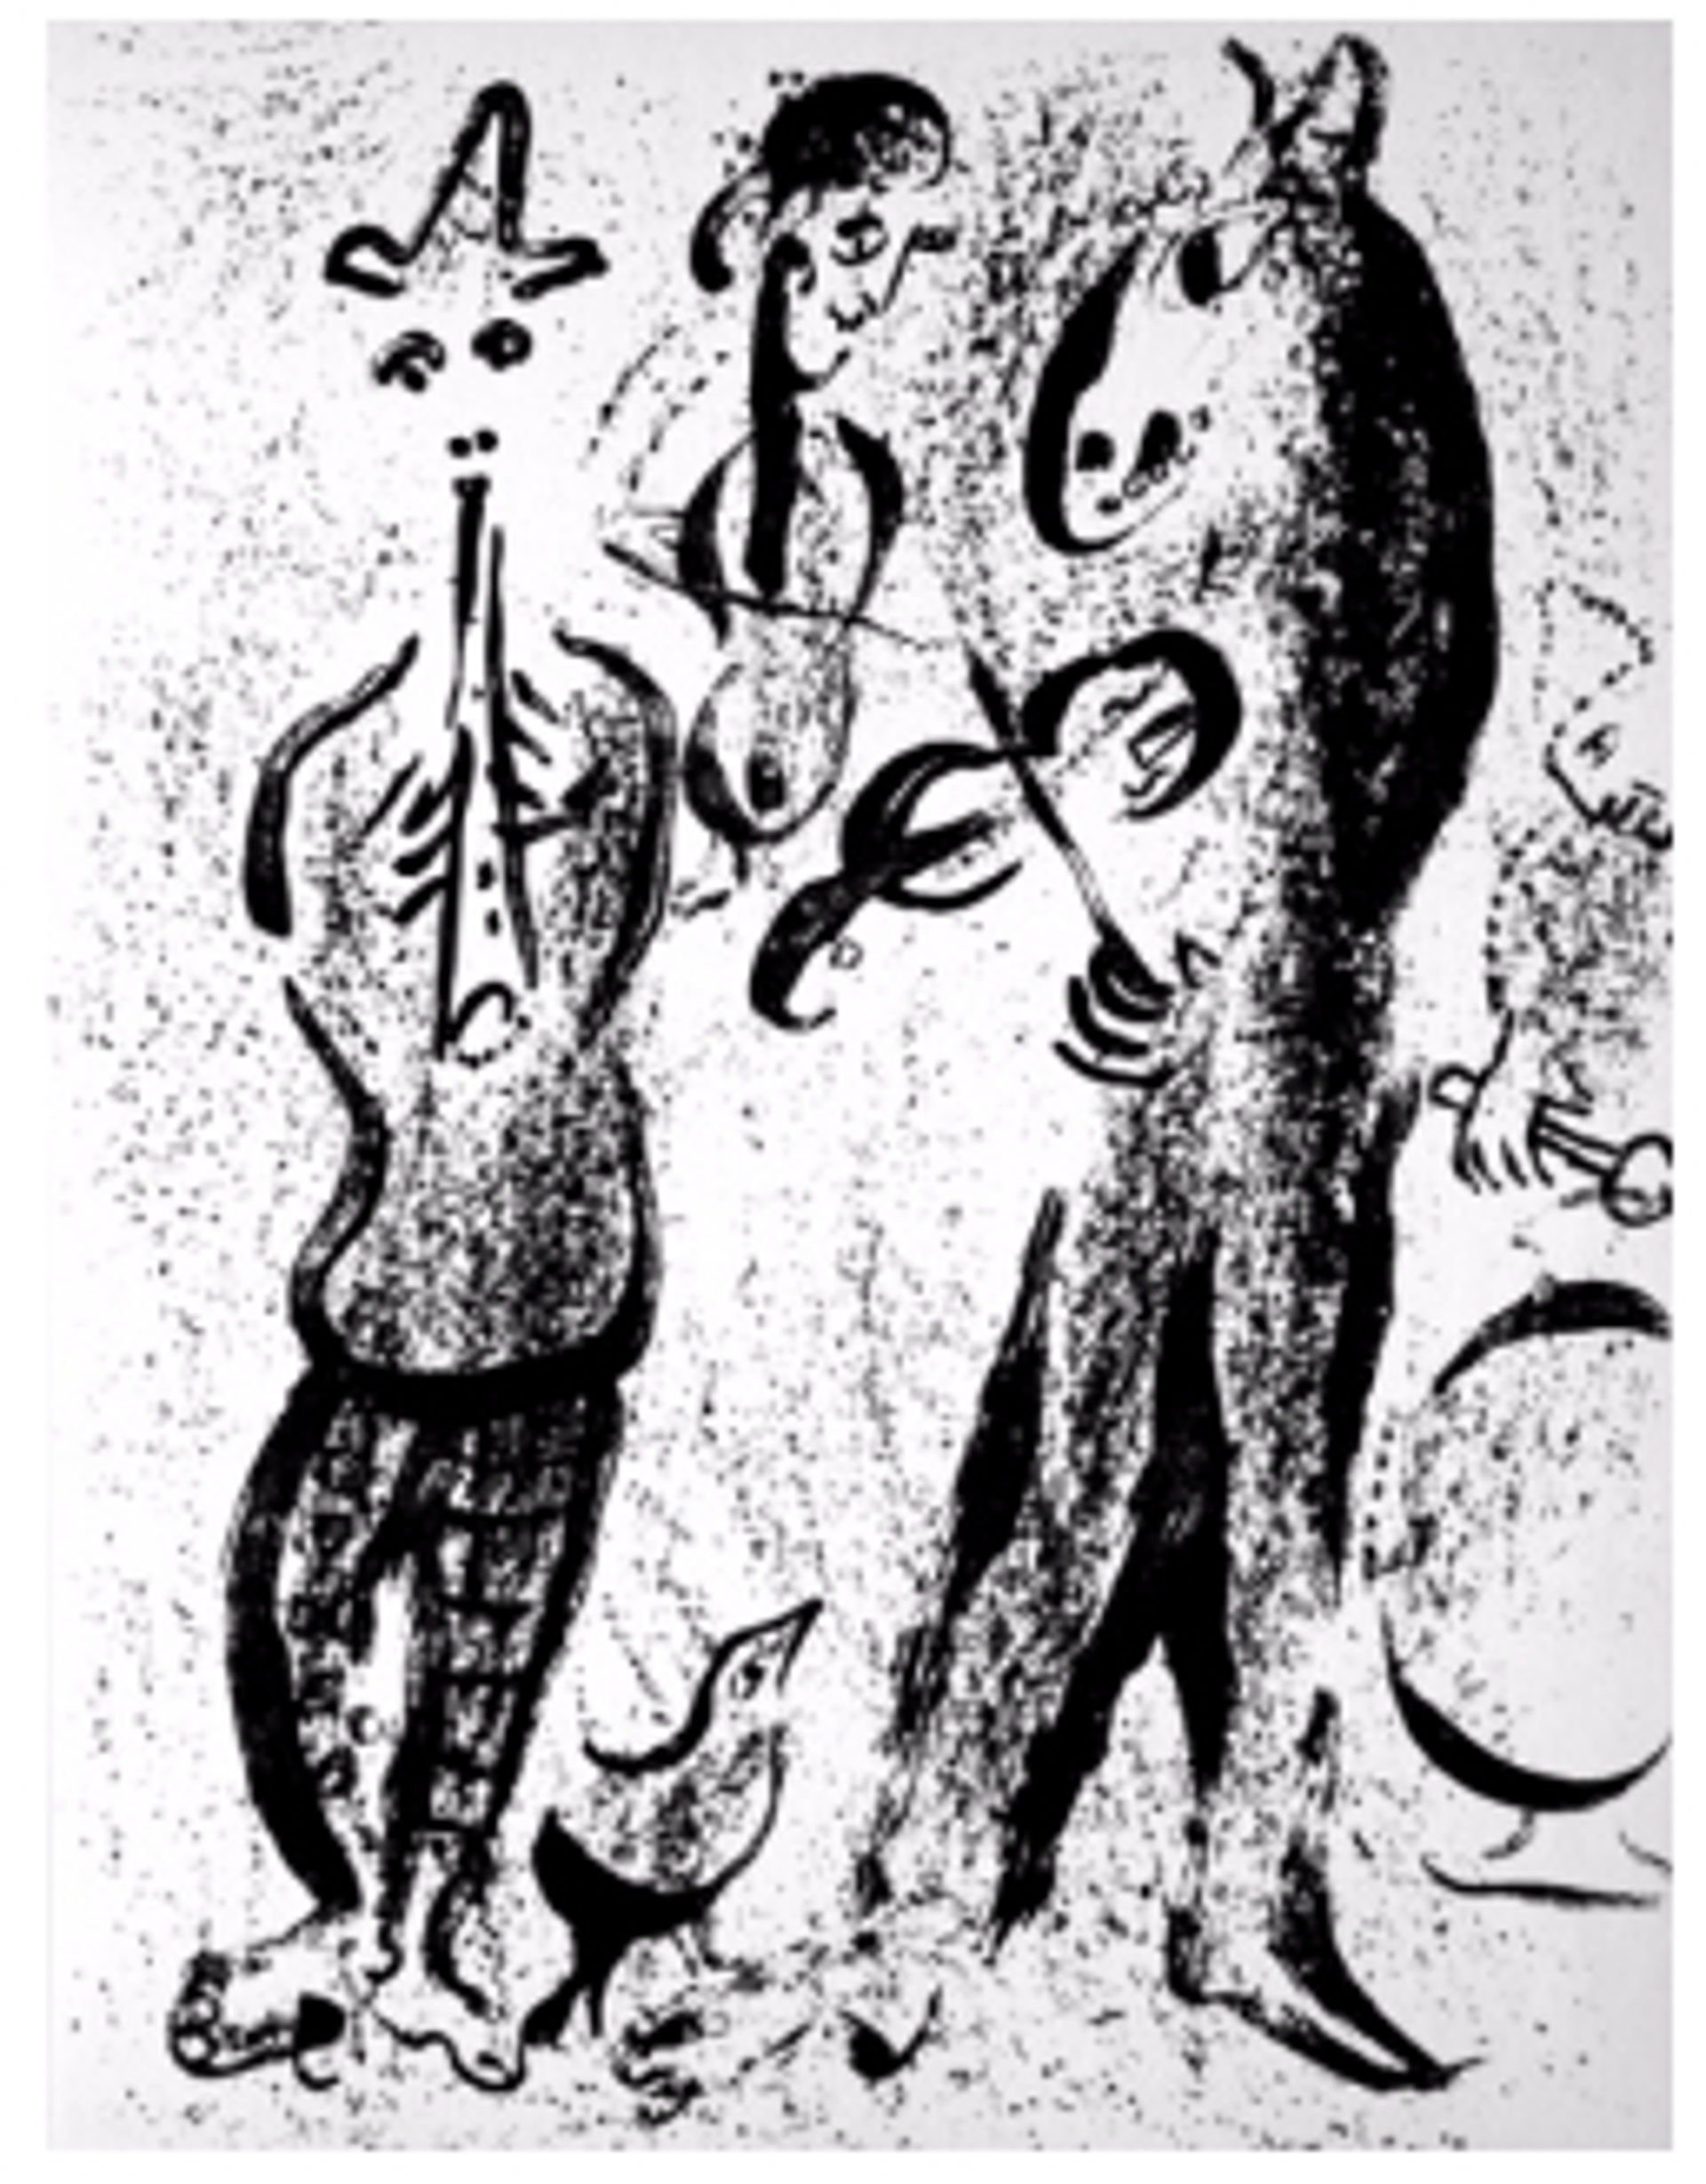 Itinerant Players from Chagall Lithographs I by Marc Chagall (1887 - 1985)